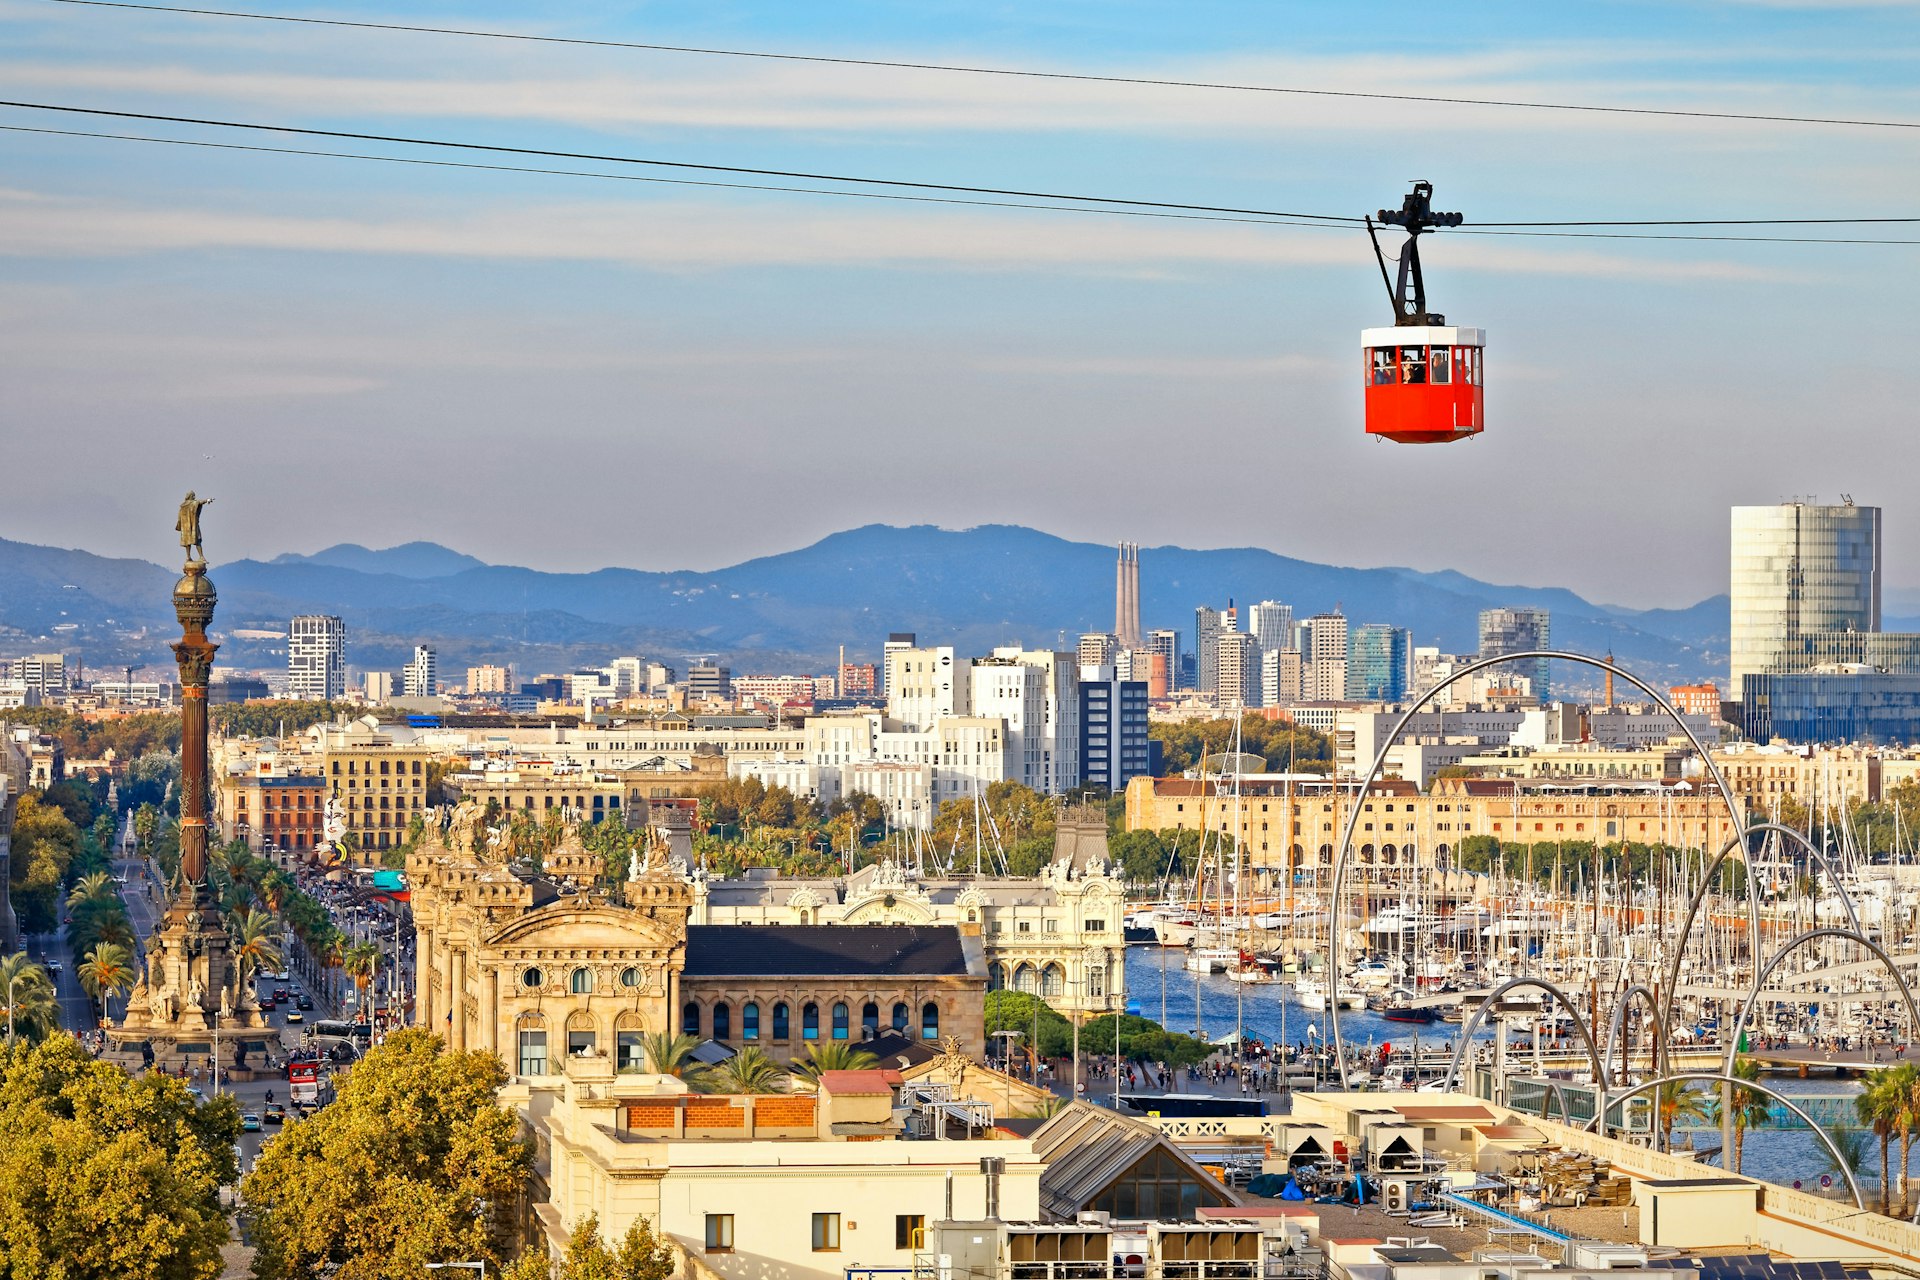 Red cabin of funicular (cable car) stands out on Barcelona's city backdrop